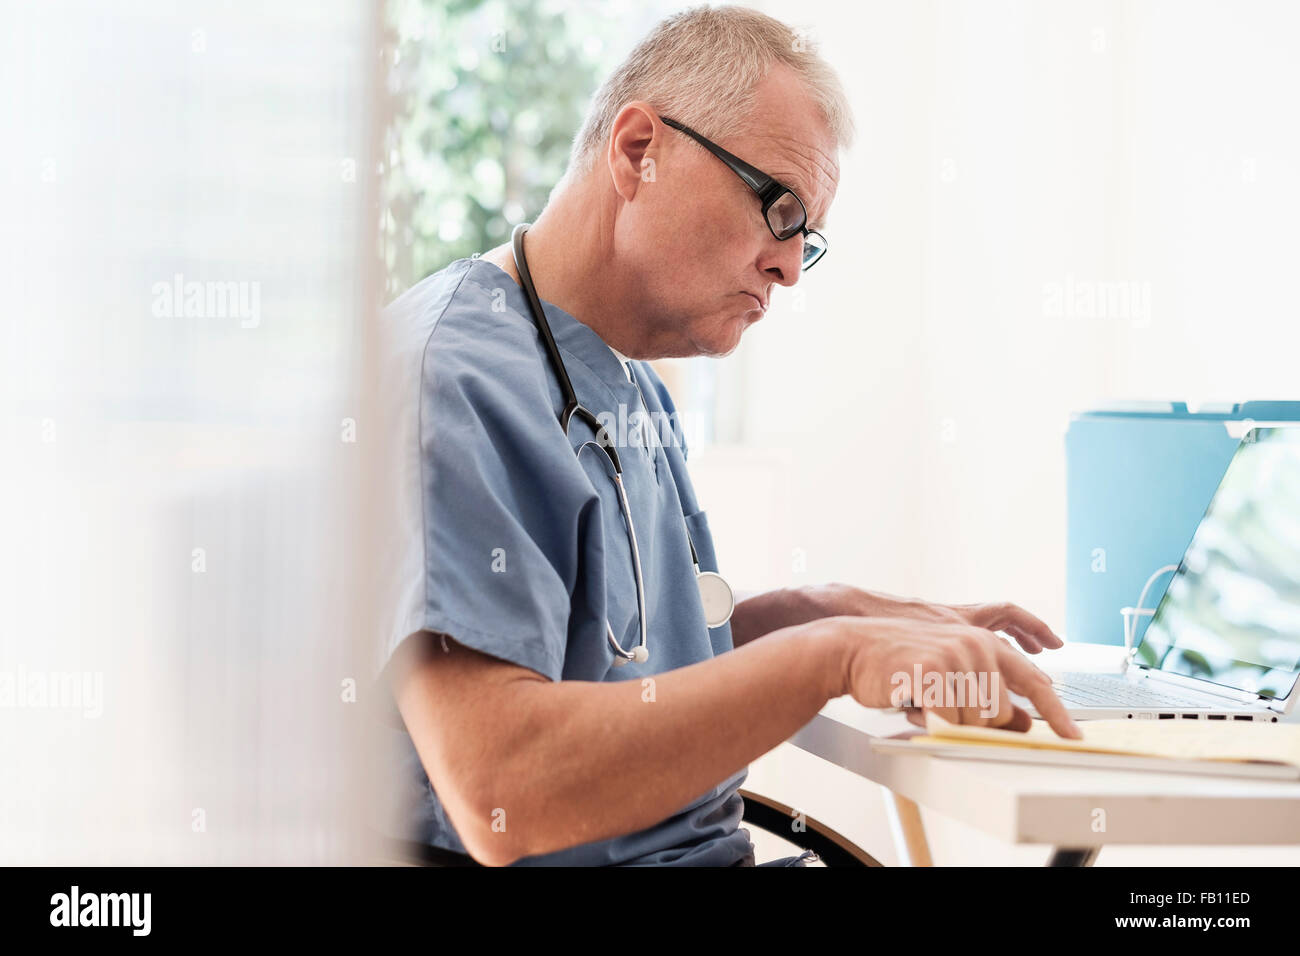 Man in scrubs using laptop in doctor's office Stock Photo